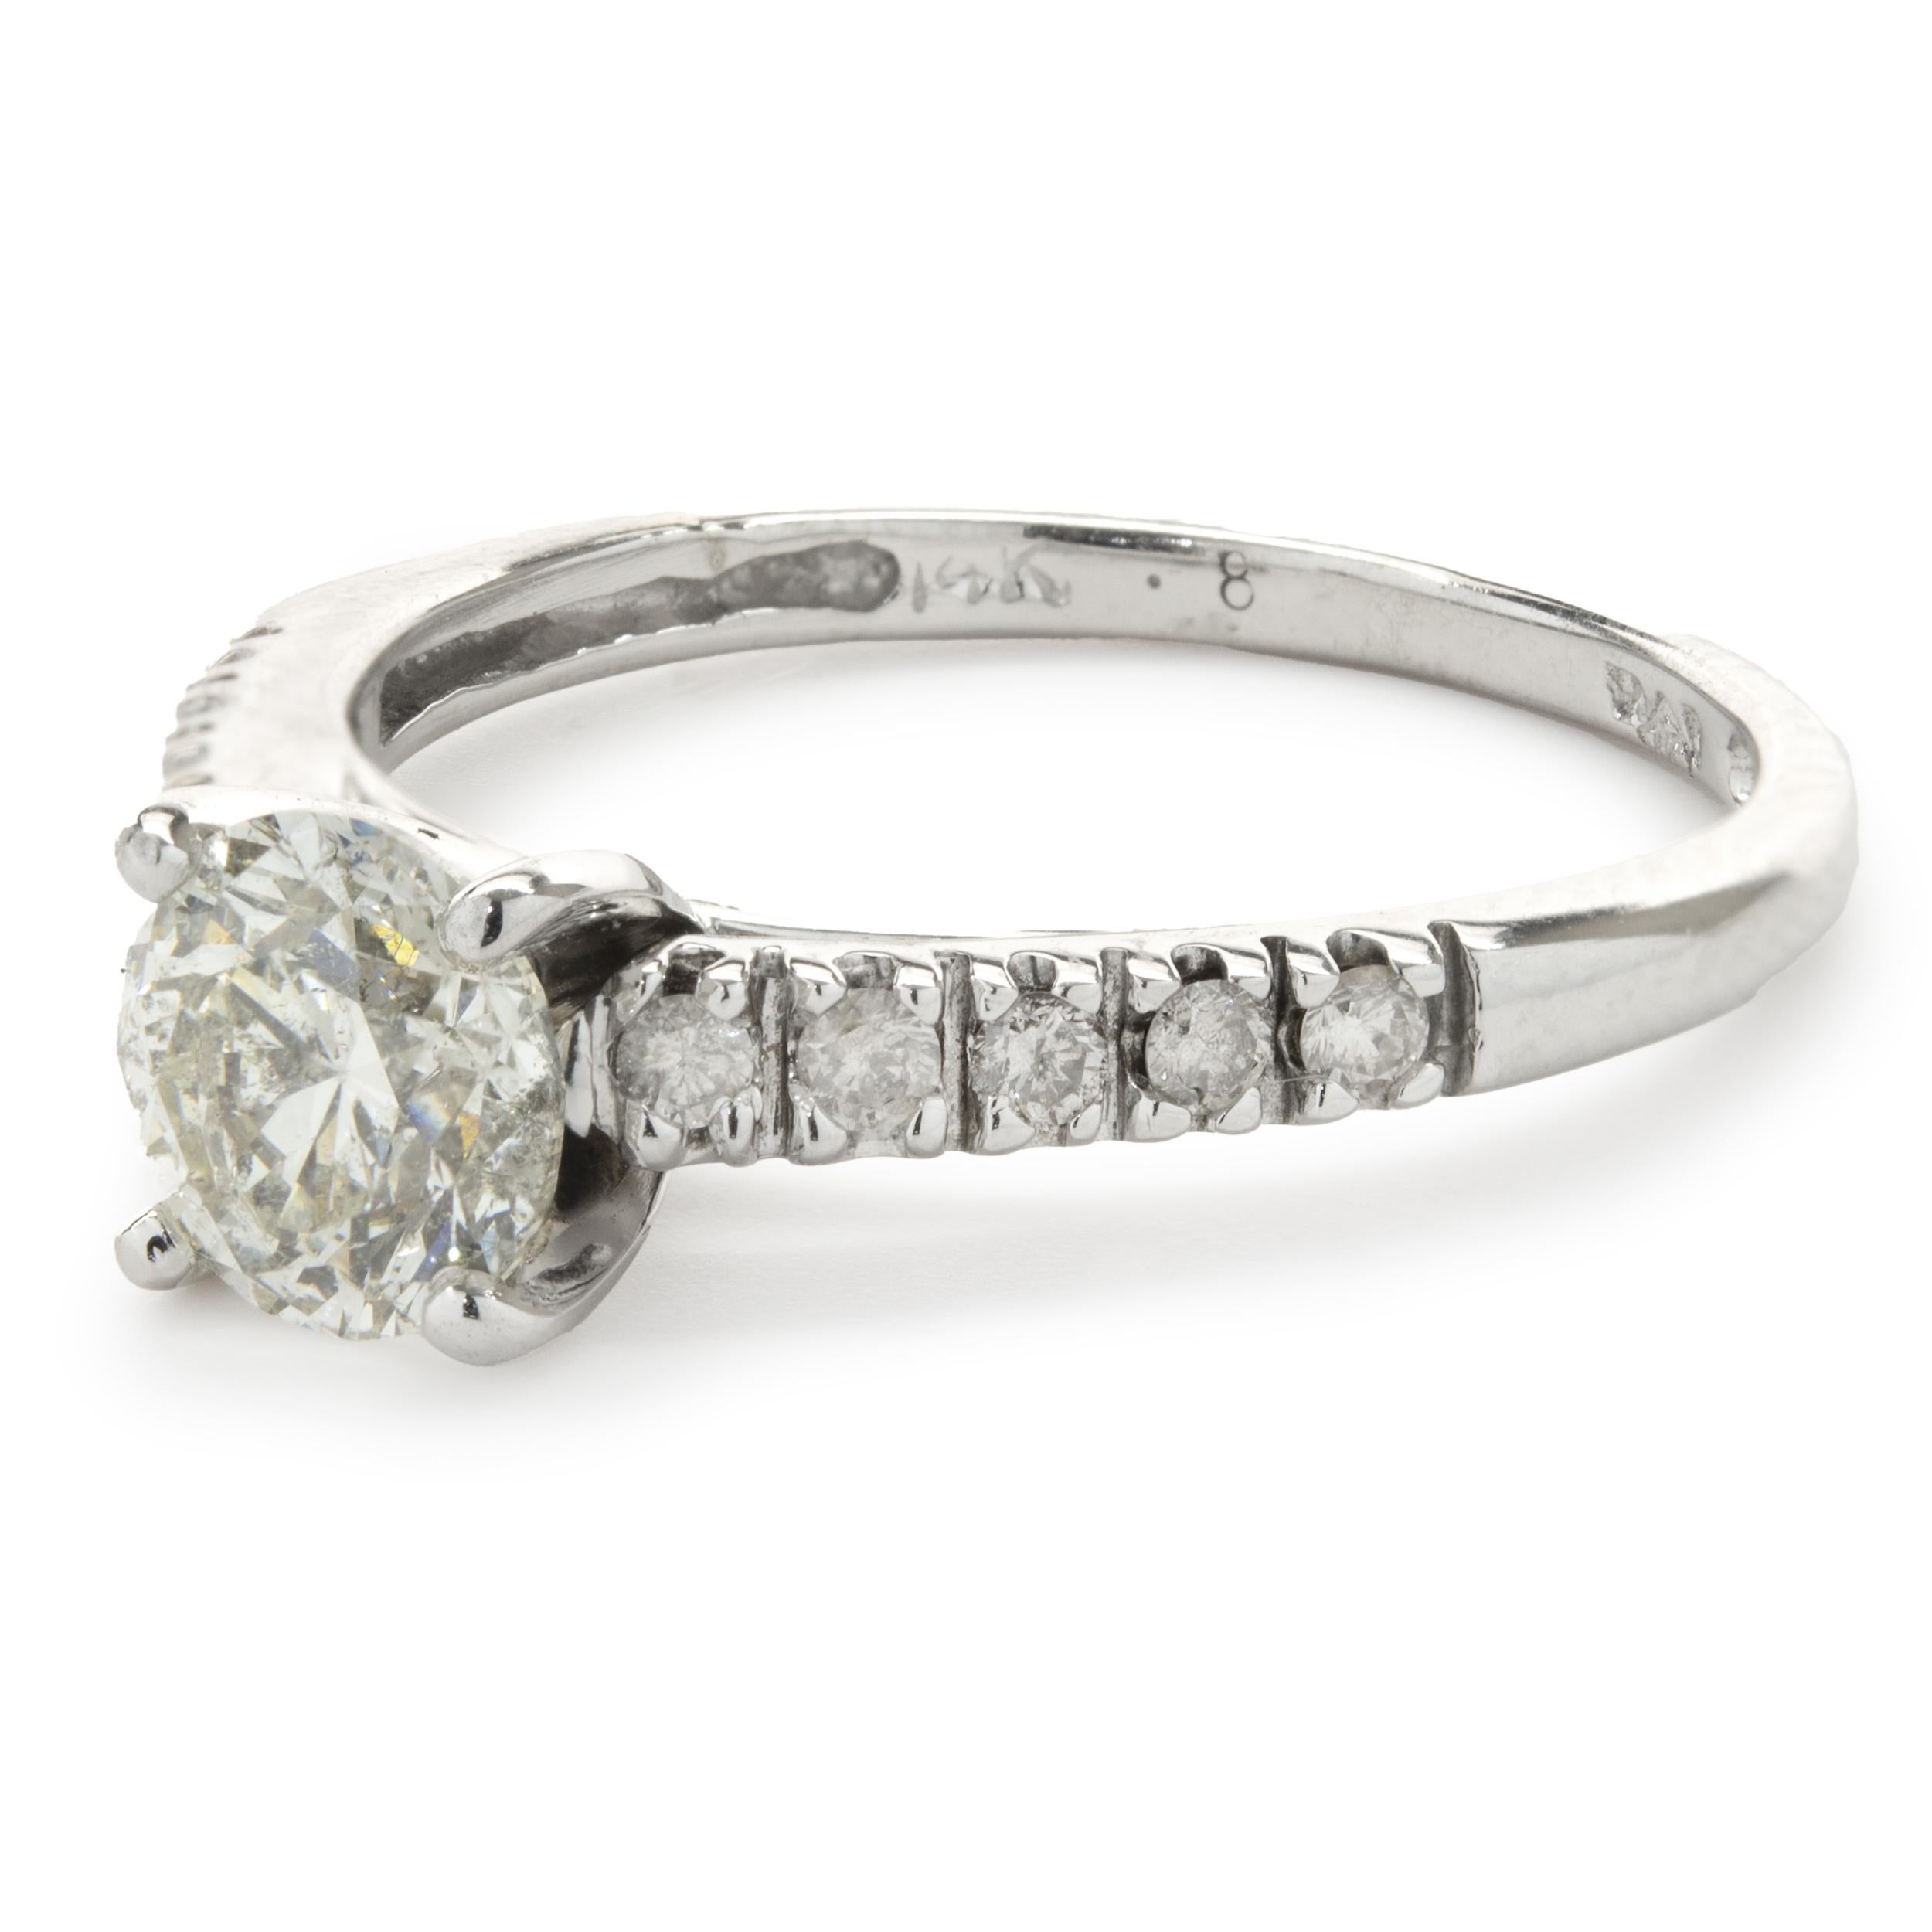 Designer: custom
Material: 14K white gold
Diamond: 1 round brilliant cut = 0.75ct
Color: H
Clarity: SI2
Diamond: 10 round cut = .20cttw
Color: G
Clarity: SI1
Ring Size: 5.5 (please allow up to 2 additional business days for sizing